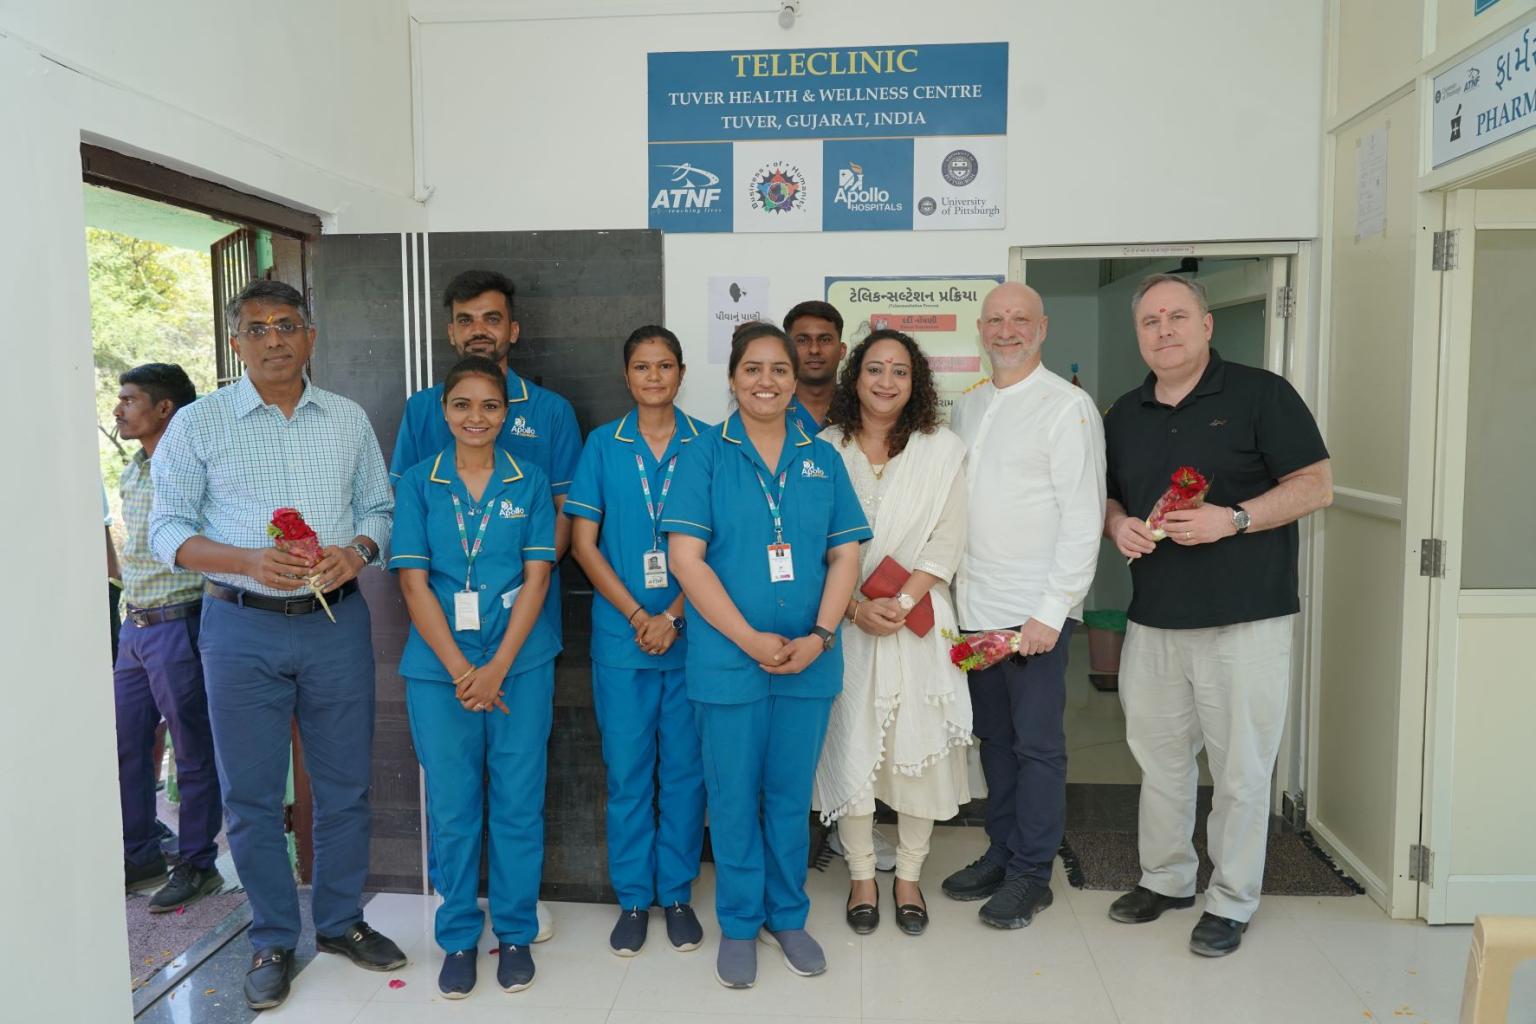 Ariel Armony and Tom O'Toole standing with Apollo staff at the THWC in Gujarat, India